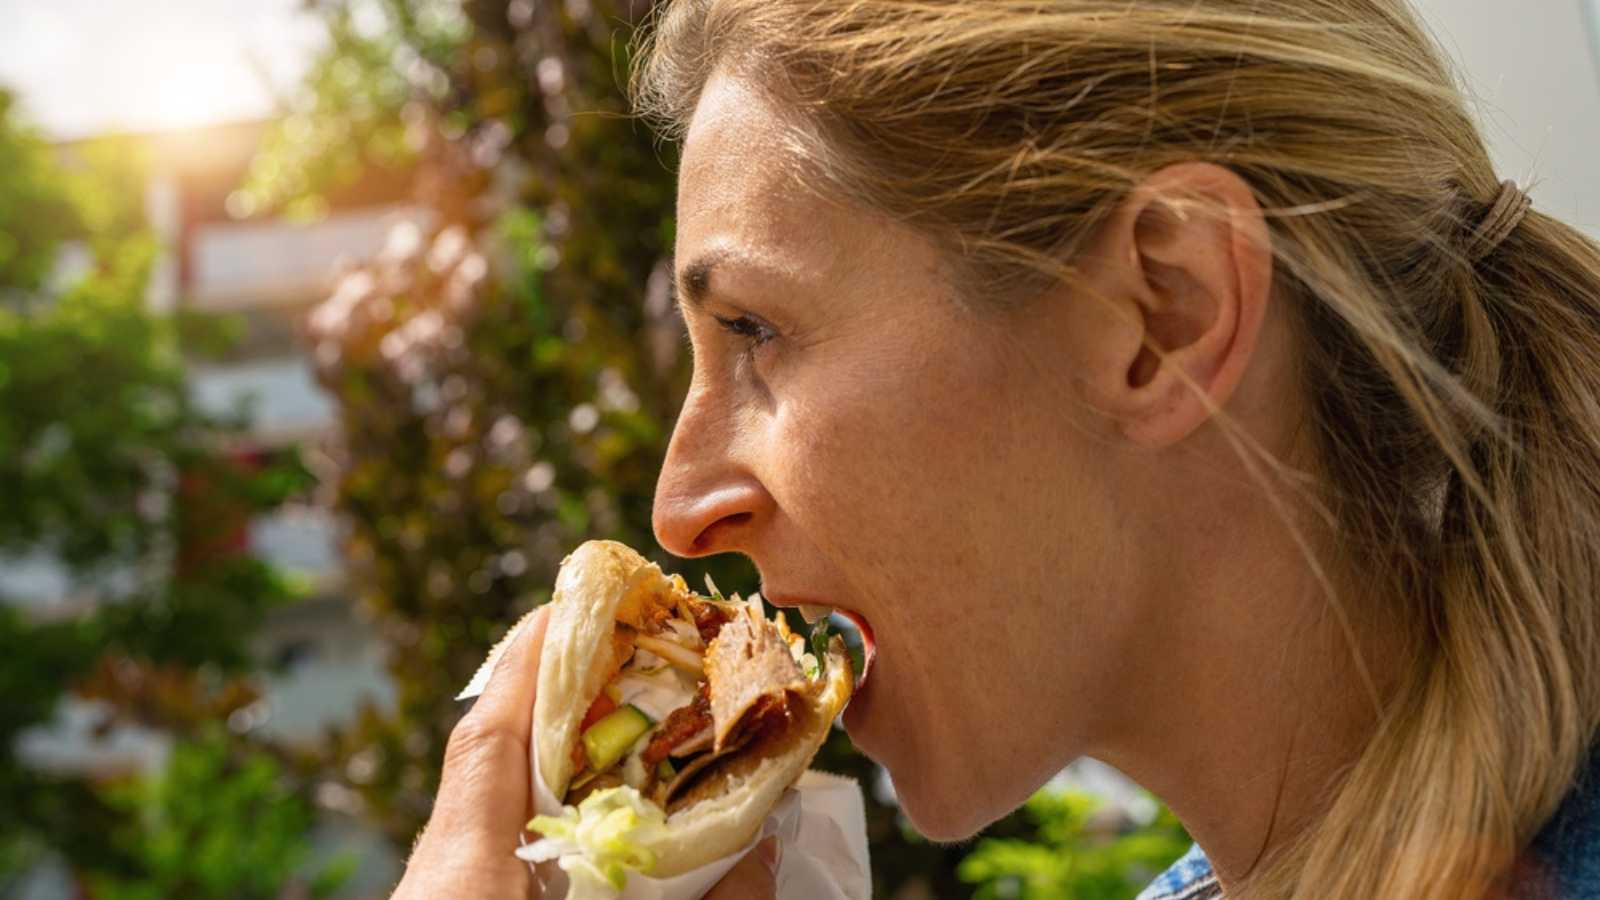 Woman eating a Doner Kebab (sandwich) in Germany famous kebab fast food snack in flatbread.